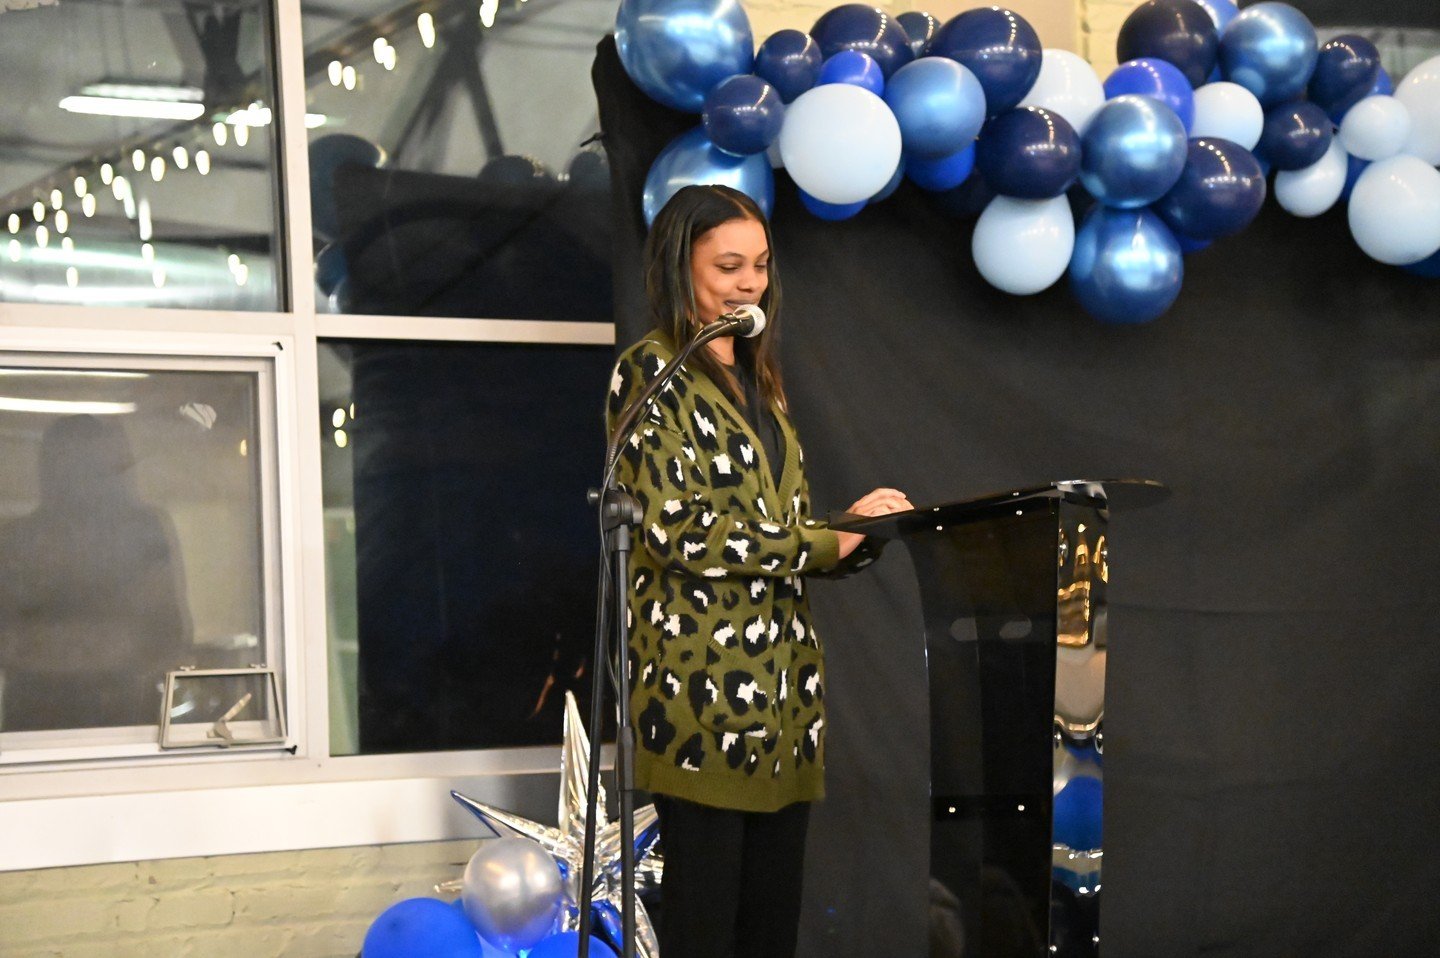 &ldquo;This place has been a home...and a family.&rdquo; 

This Women's History Month, we want to spotlight our Youth of the Year winner, Jaeda Perry! At our Honor Night event, Jaeda delivered an amazing speech that highlighted her time at the club, 